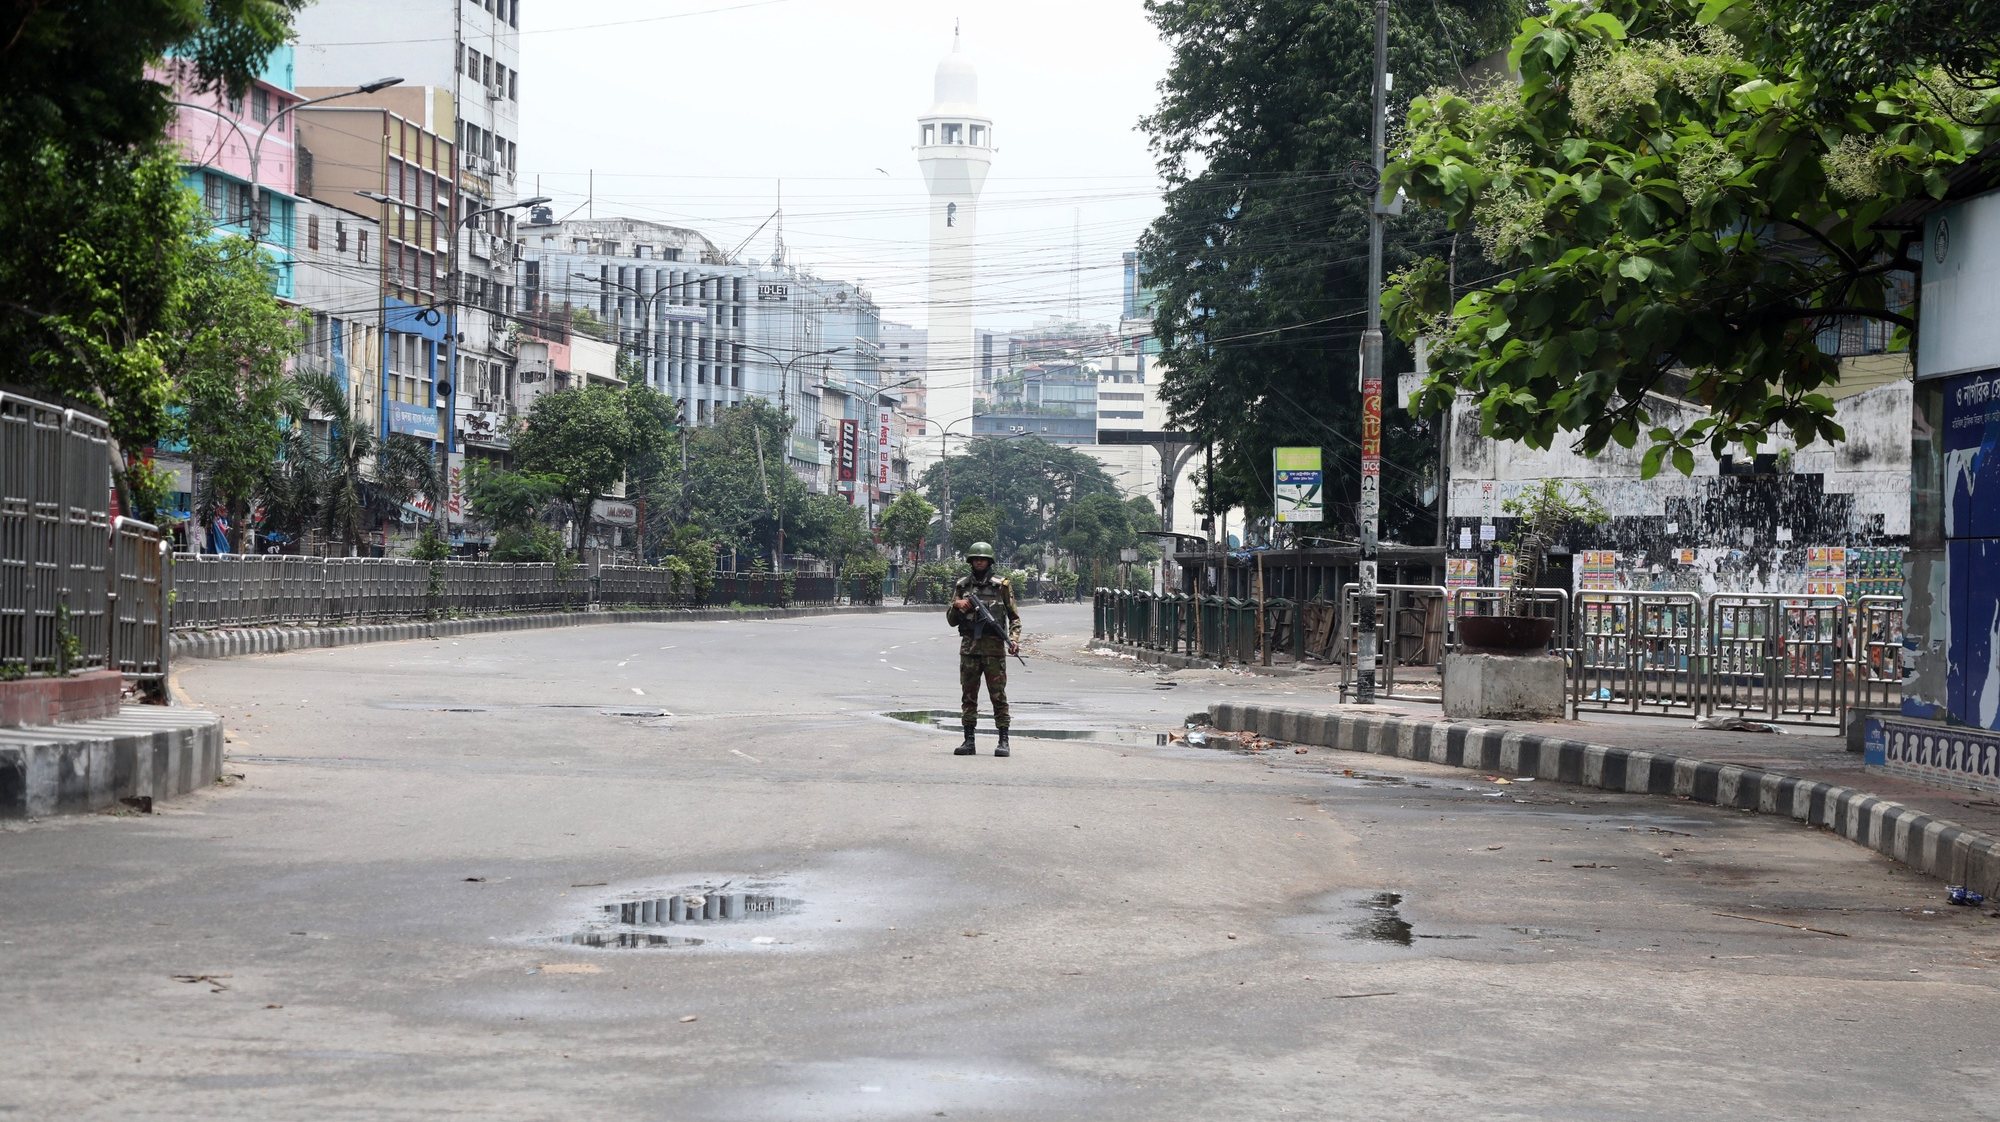 epa11491096 Bangladeshi soldiers guard on a street to quell increasing civil unrest sparked by student demonstrations in Dhaka, Bangladesh, 22 July 2024. On 22 July Bangladesh was under curfew; widespread disruption of telecoms prevailed a day after the Bangladesh Supreme Court scrapped some quotas for government jobs that sparked protests, and police were authorized to enforce &#039;shoot on sight&#039; orders across the country during curfew as casualties mounted and law enforcement struggled to contain the unrest. The Bangladeshi government imposed a nationwide curfew and deployed military forces after violence broke out in Dhaka and other regions following student-led protests demanding reforms to the government&#039;s job quota system.  EPA/MONIRUL ALAM